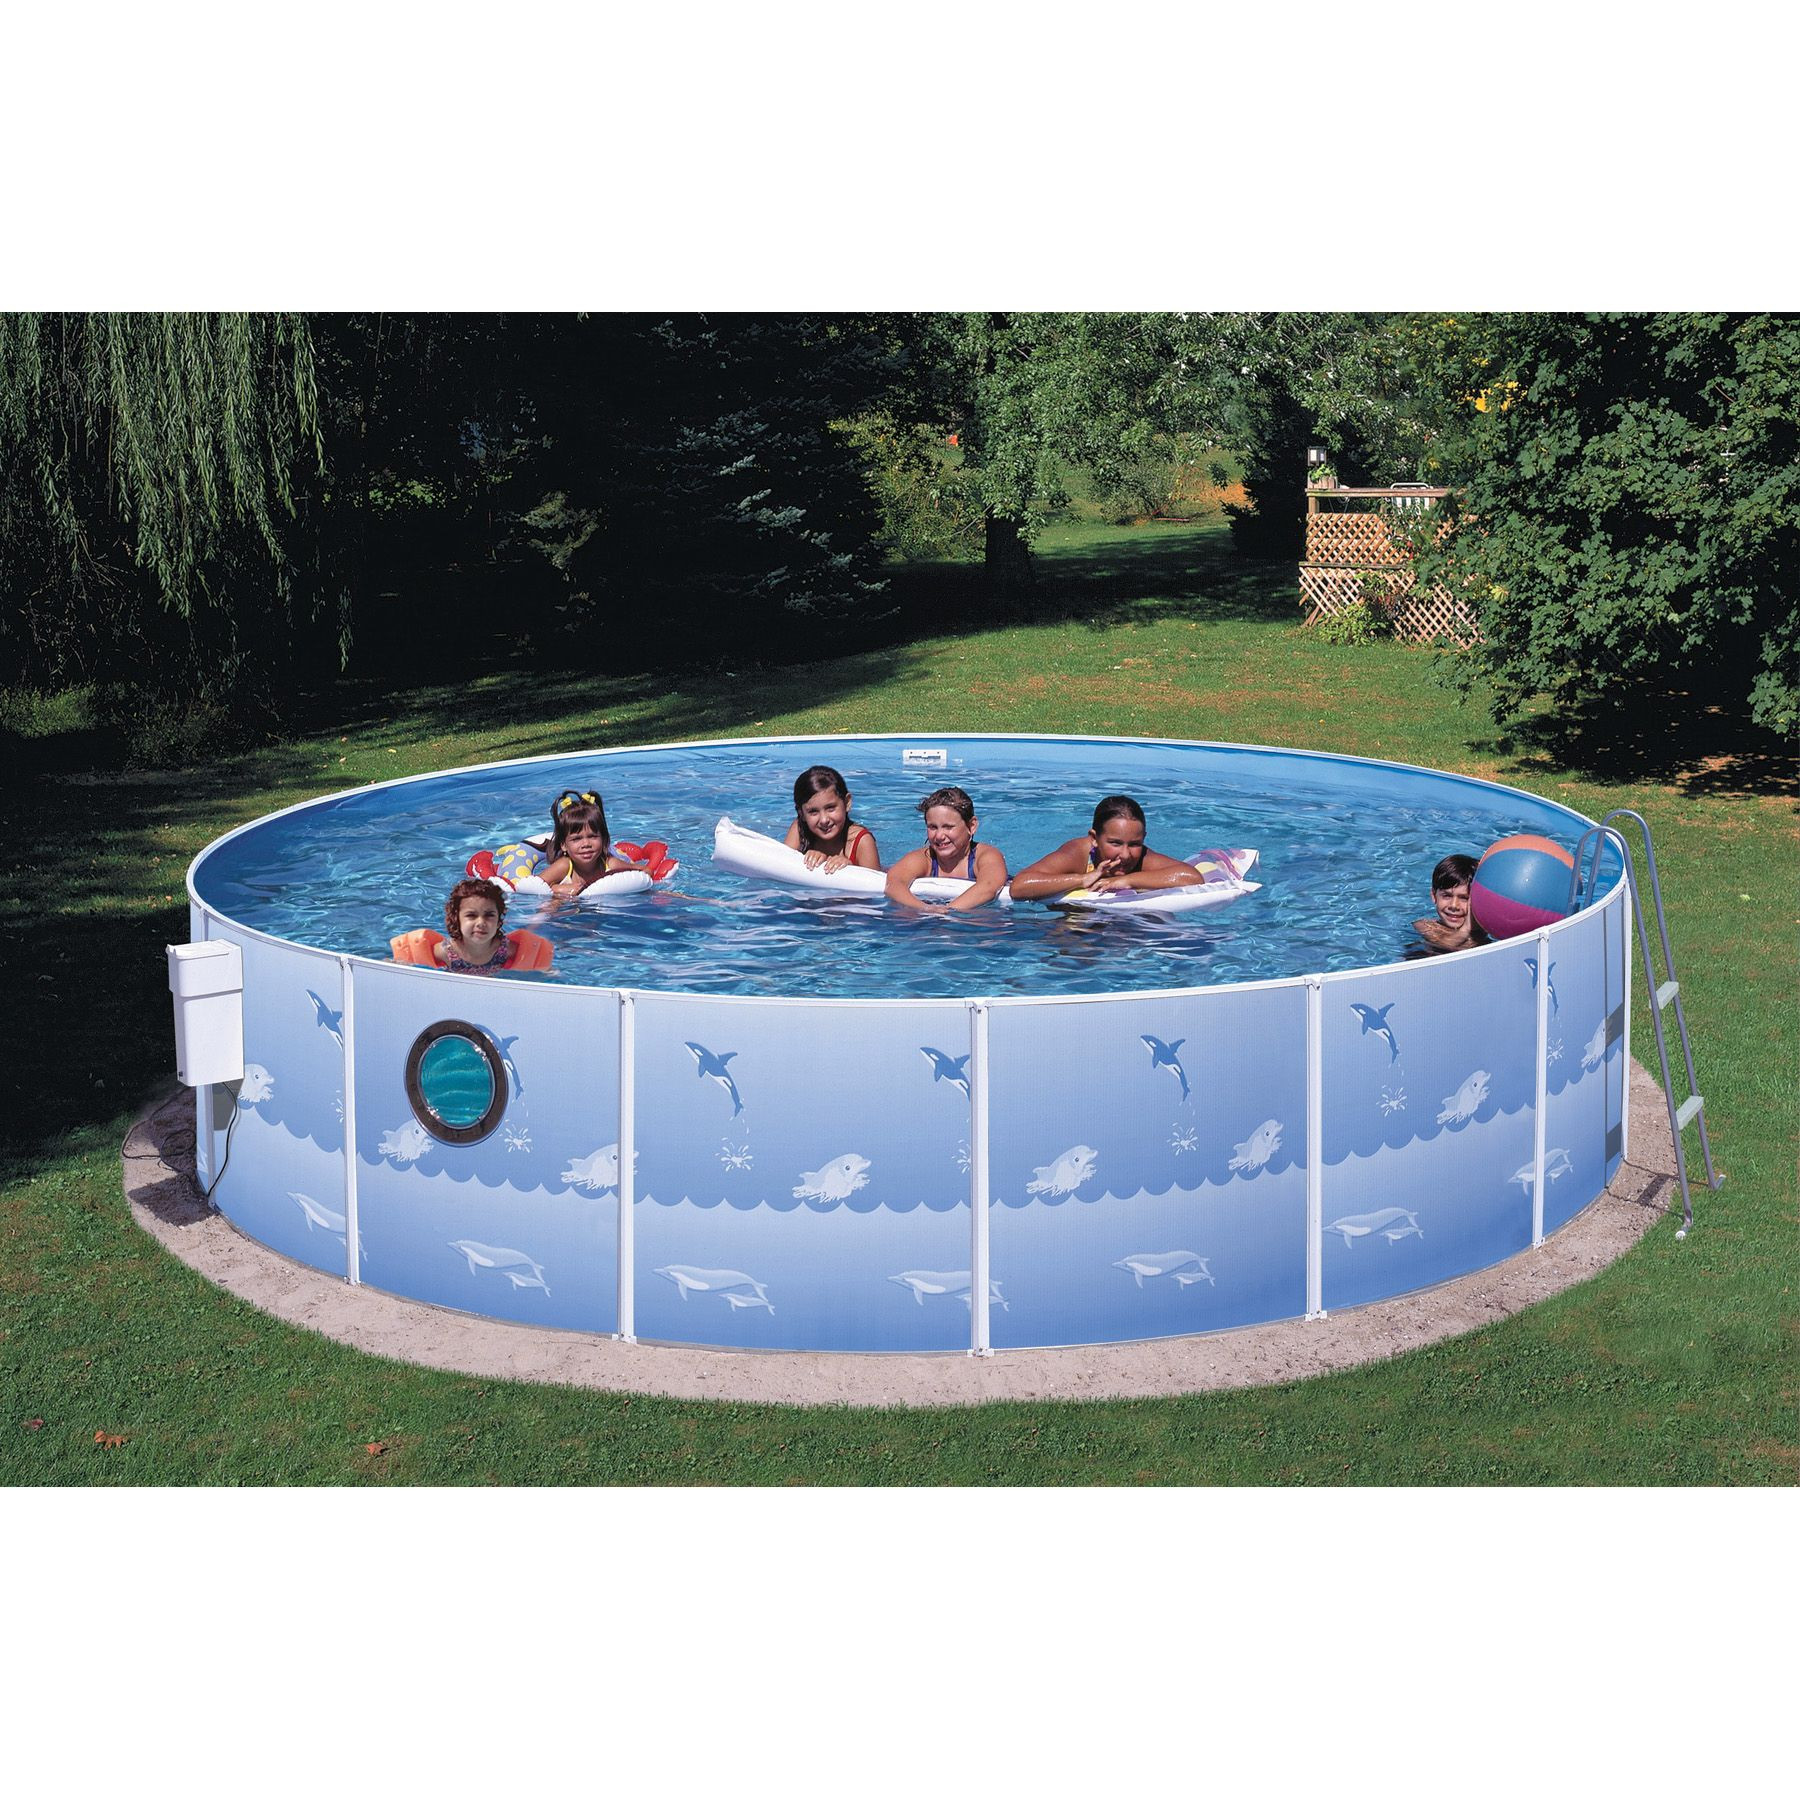 Backyard Pool Superstore Coupons
 35 Marvelous Backyard Pool Superstore Coupons Home